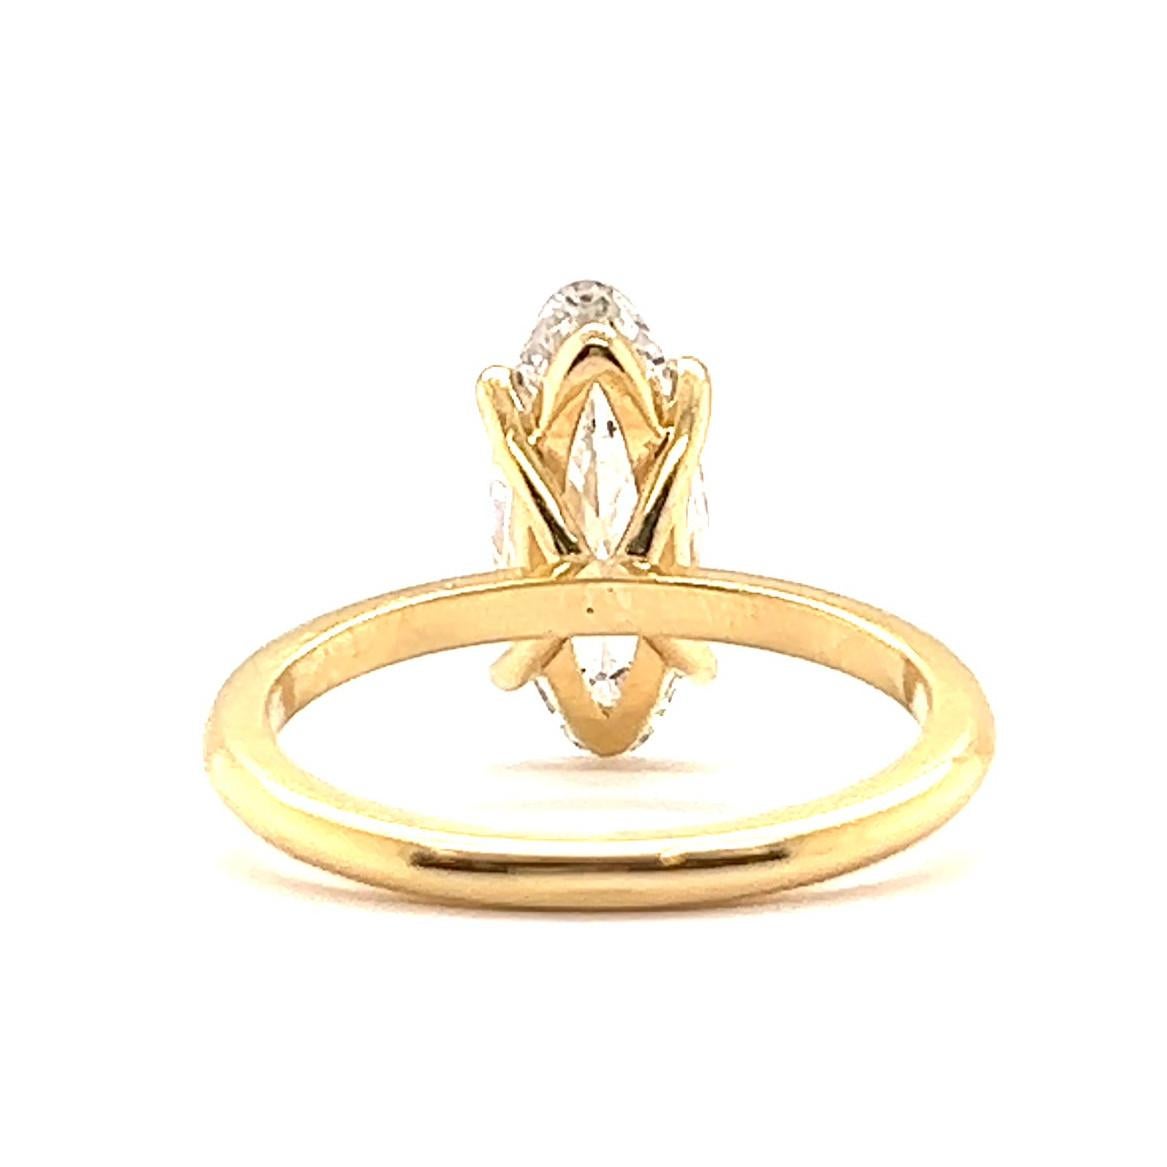 Contemporary GIA Antique Moval Cut Diamond 18 Karat Gold Solitaire Engagement Ring